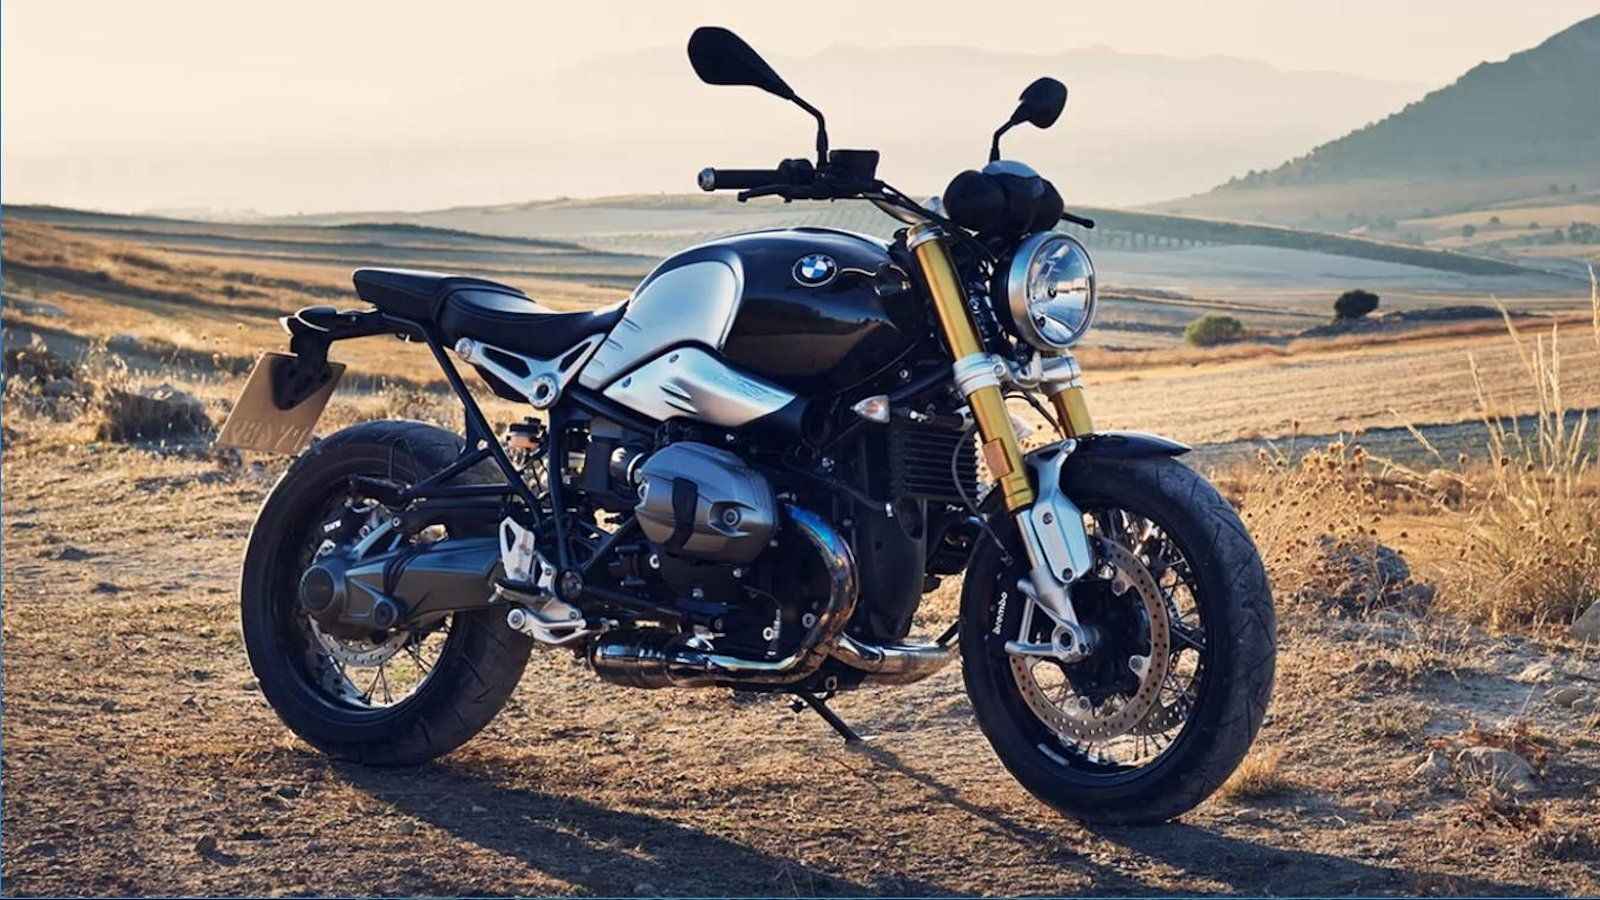 2019 BMW R NineT Picture, Photo, Wallpaper And Video